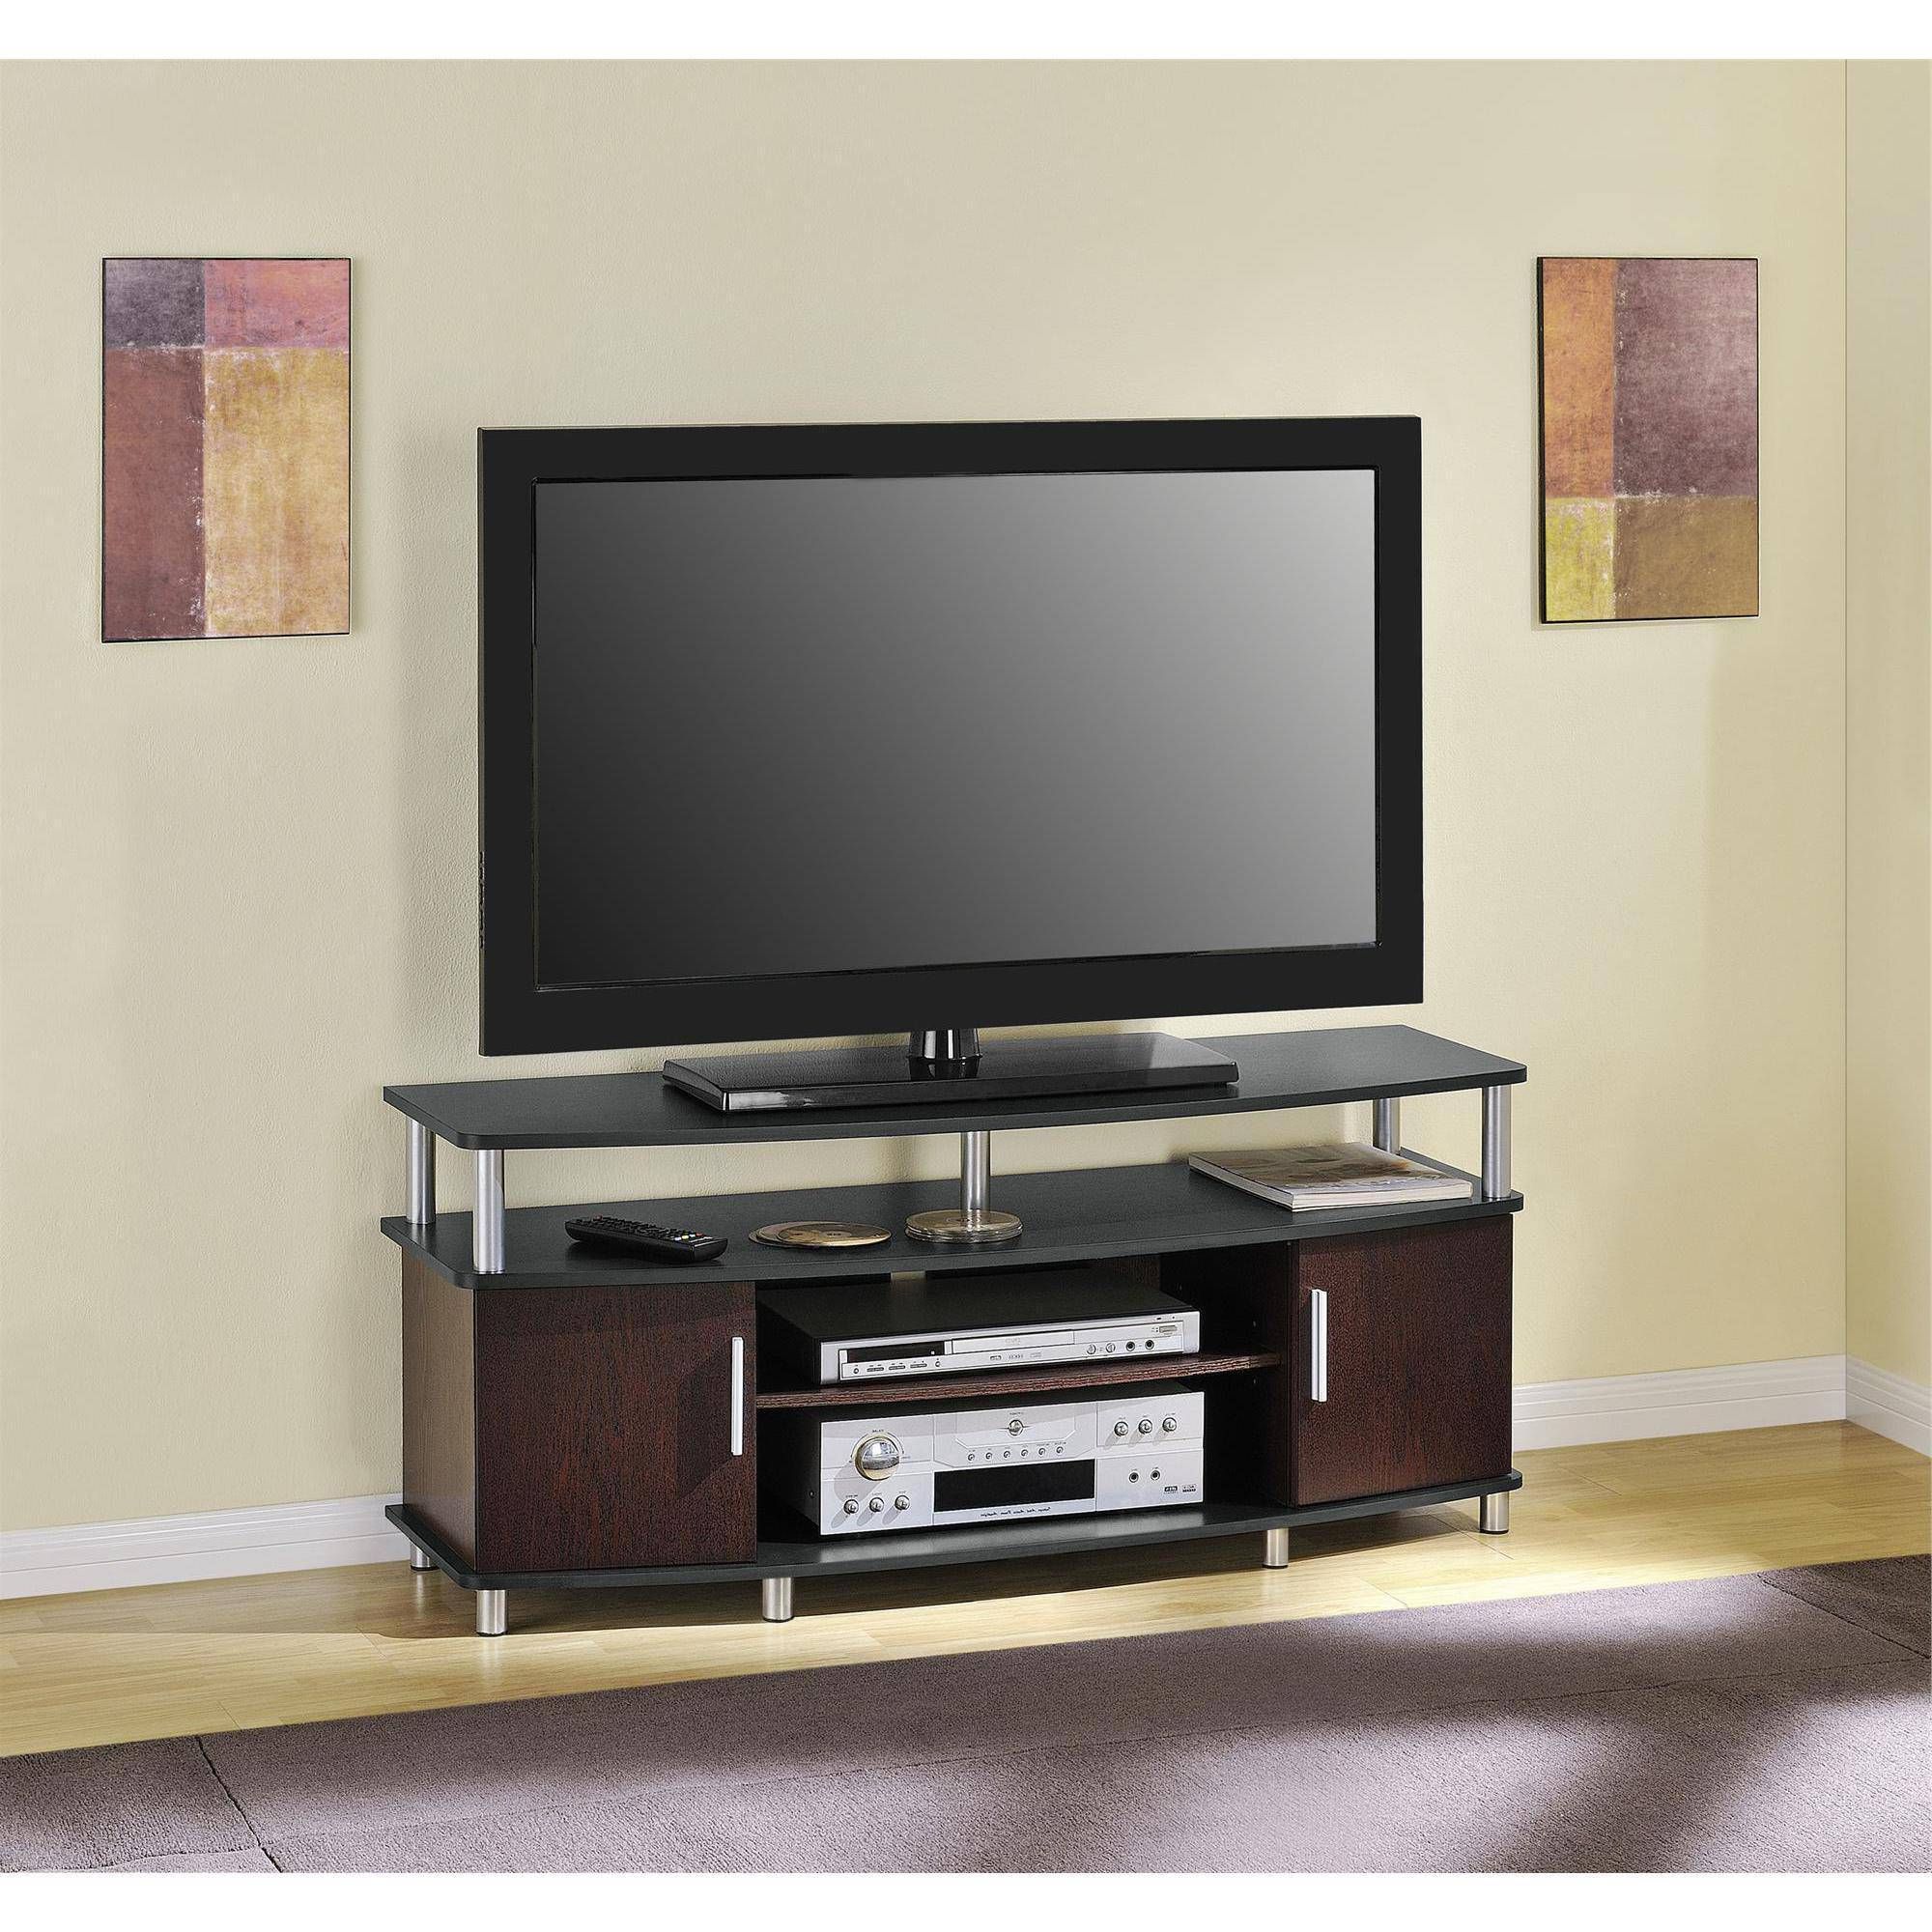 Wooden Tv Stands For 50 Inch Tv With Widely Used Carson Tv Stand, For Tvs Up To 50", Multiple Finishes – Walmart (View 1 of 20)